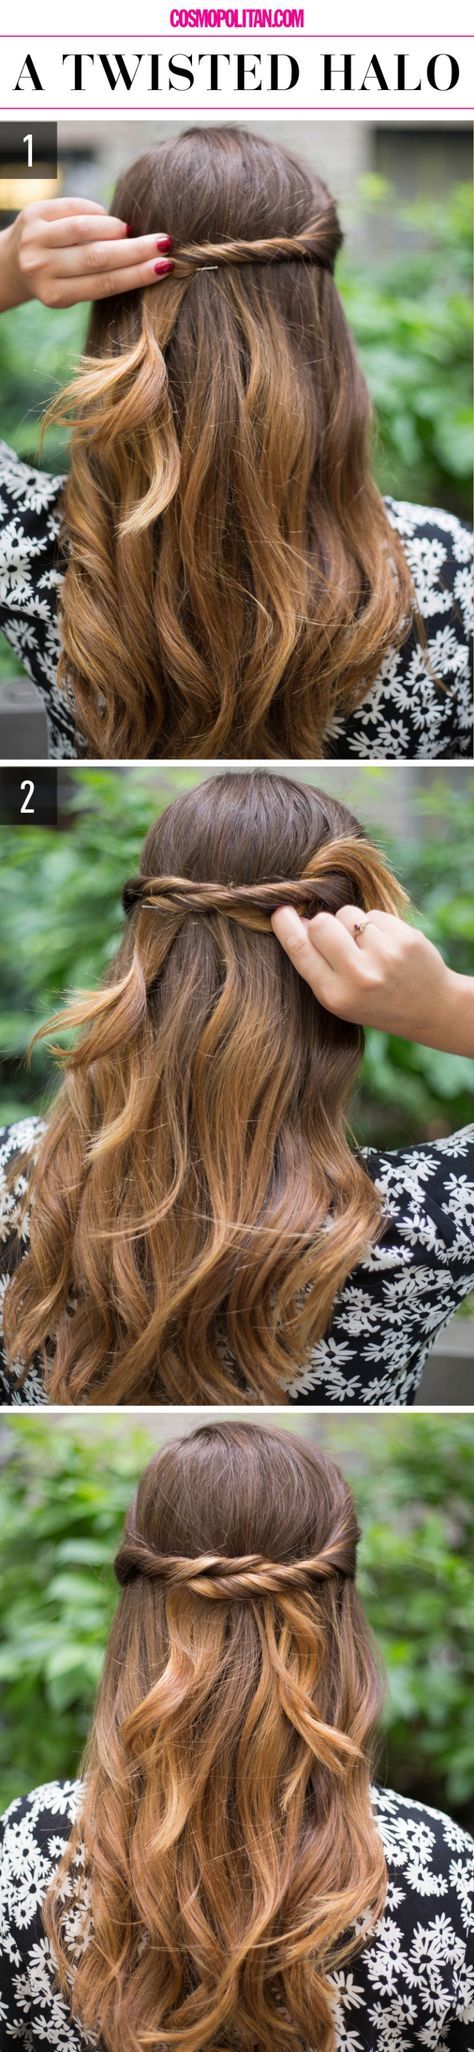 15 Super-Easy Hairstyles for Lazy Girls Who Can't Even